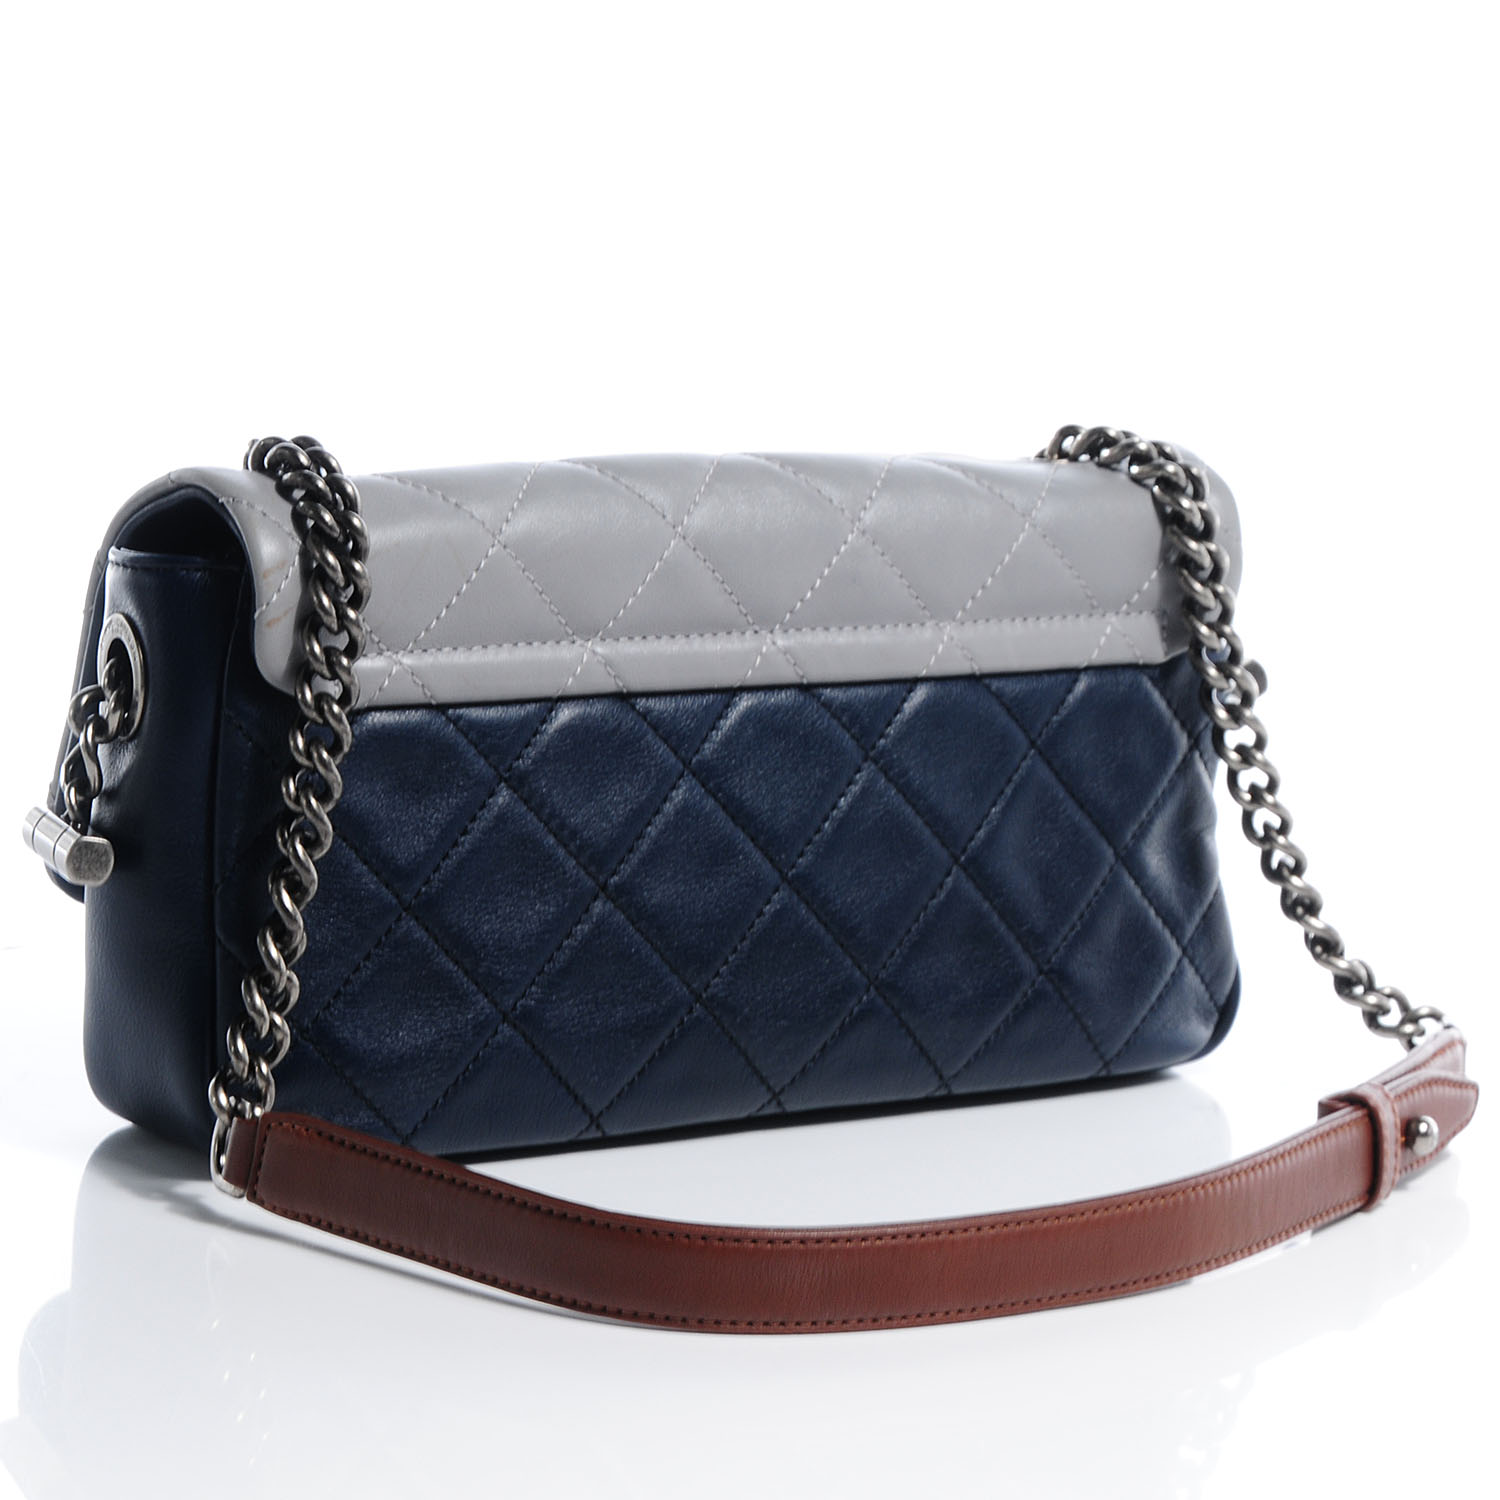 CHANEL Iridescent Calfskin Tri-Color Country Chic Flap Navy Blue 65120 ...